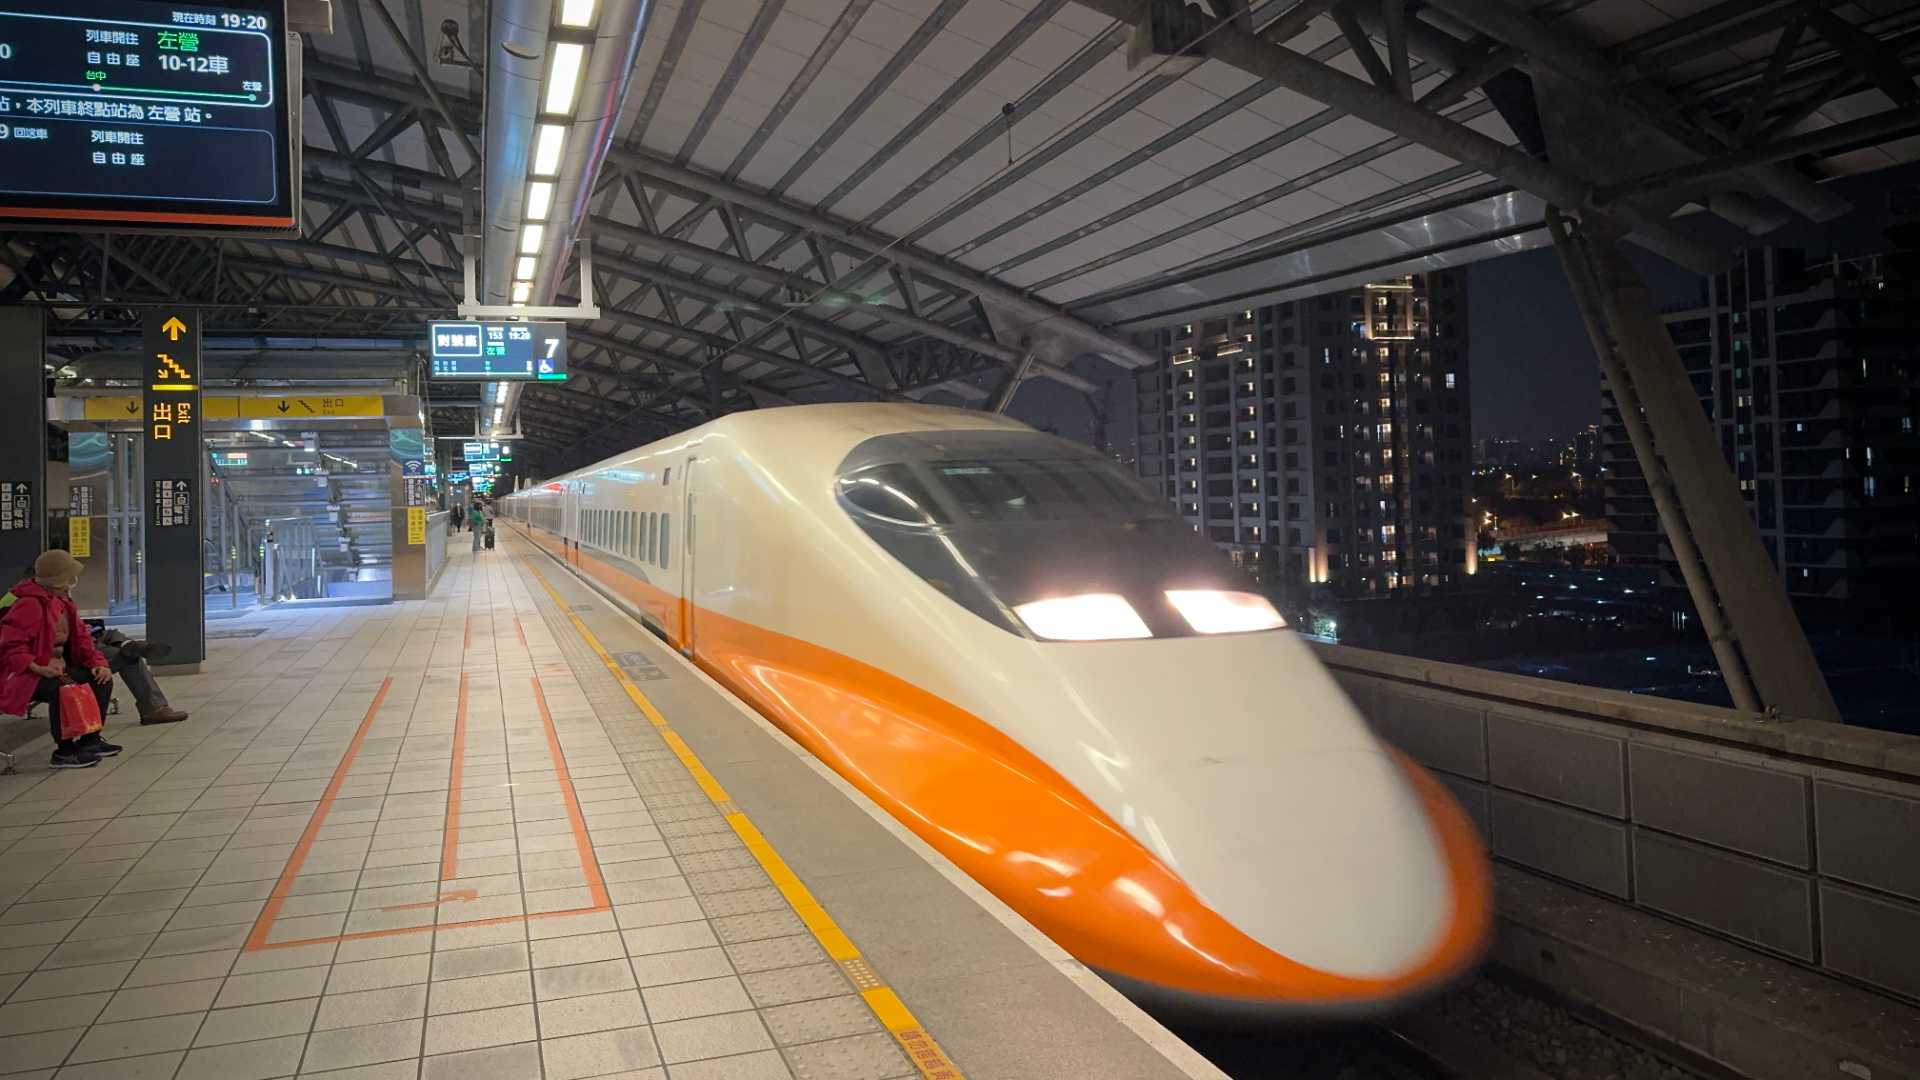 A bullet train arriving at Taichung High Speed Rail Station.